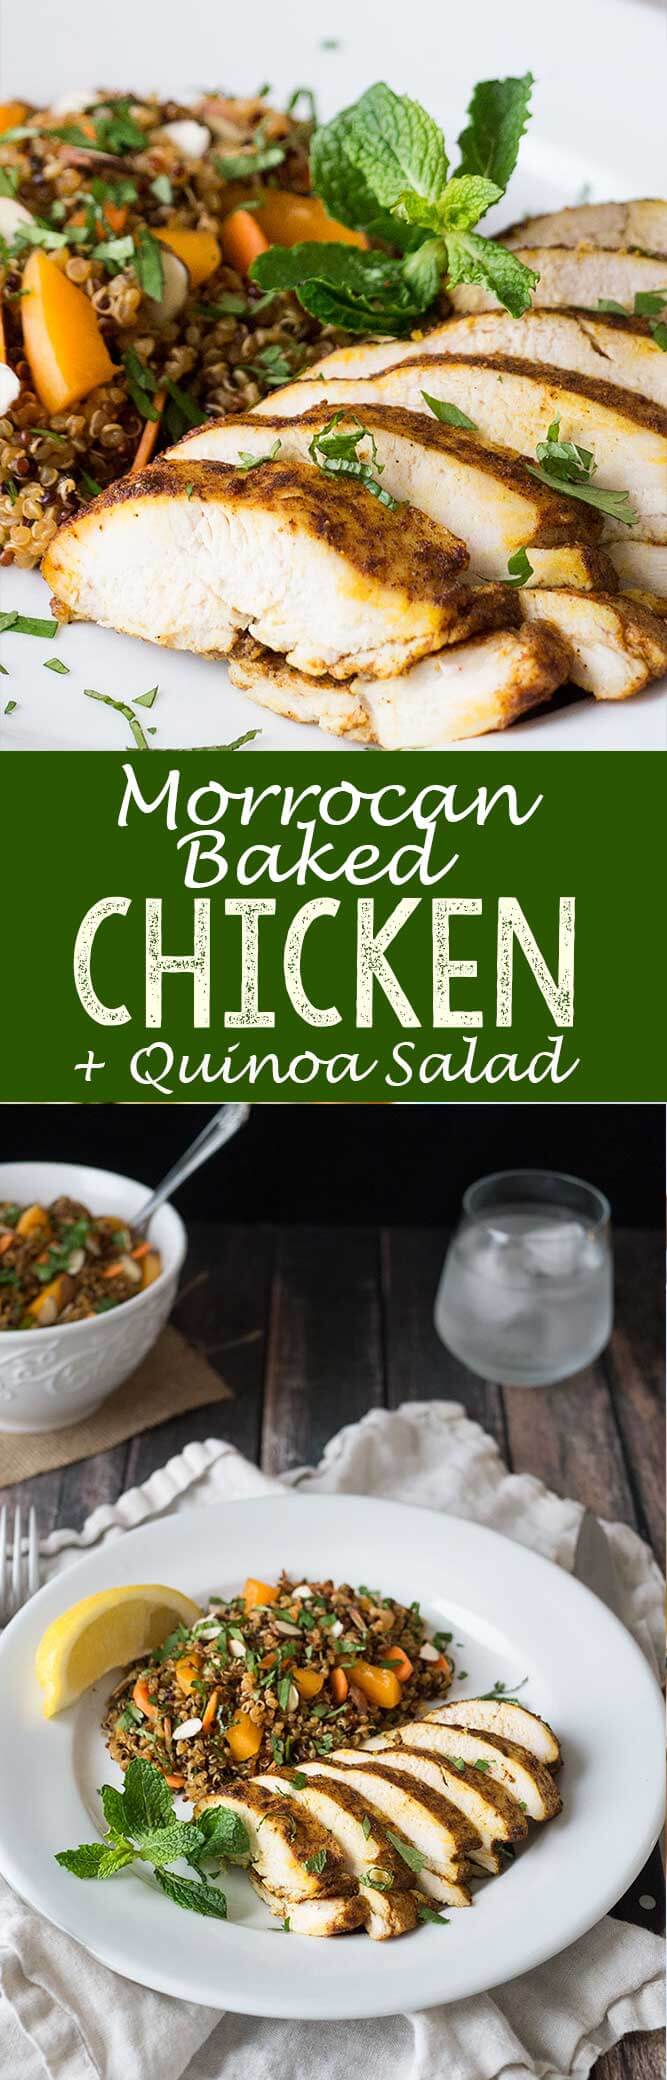 Flavorful morrocan baked chicken with a quinoa salad for the perfect meal